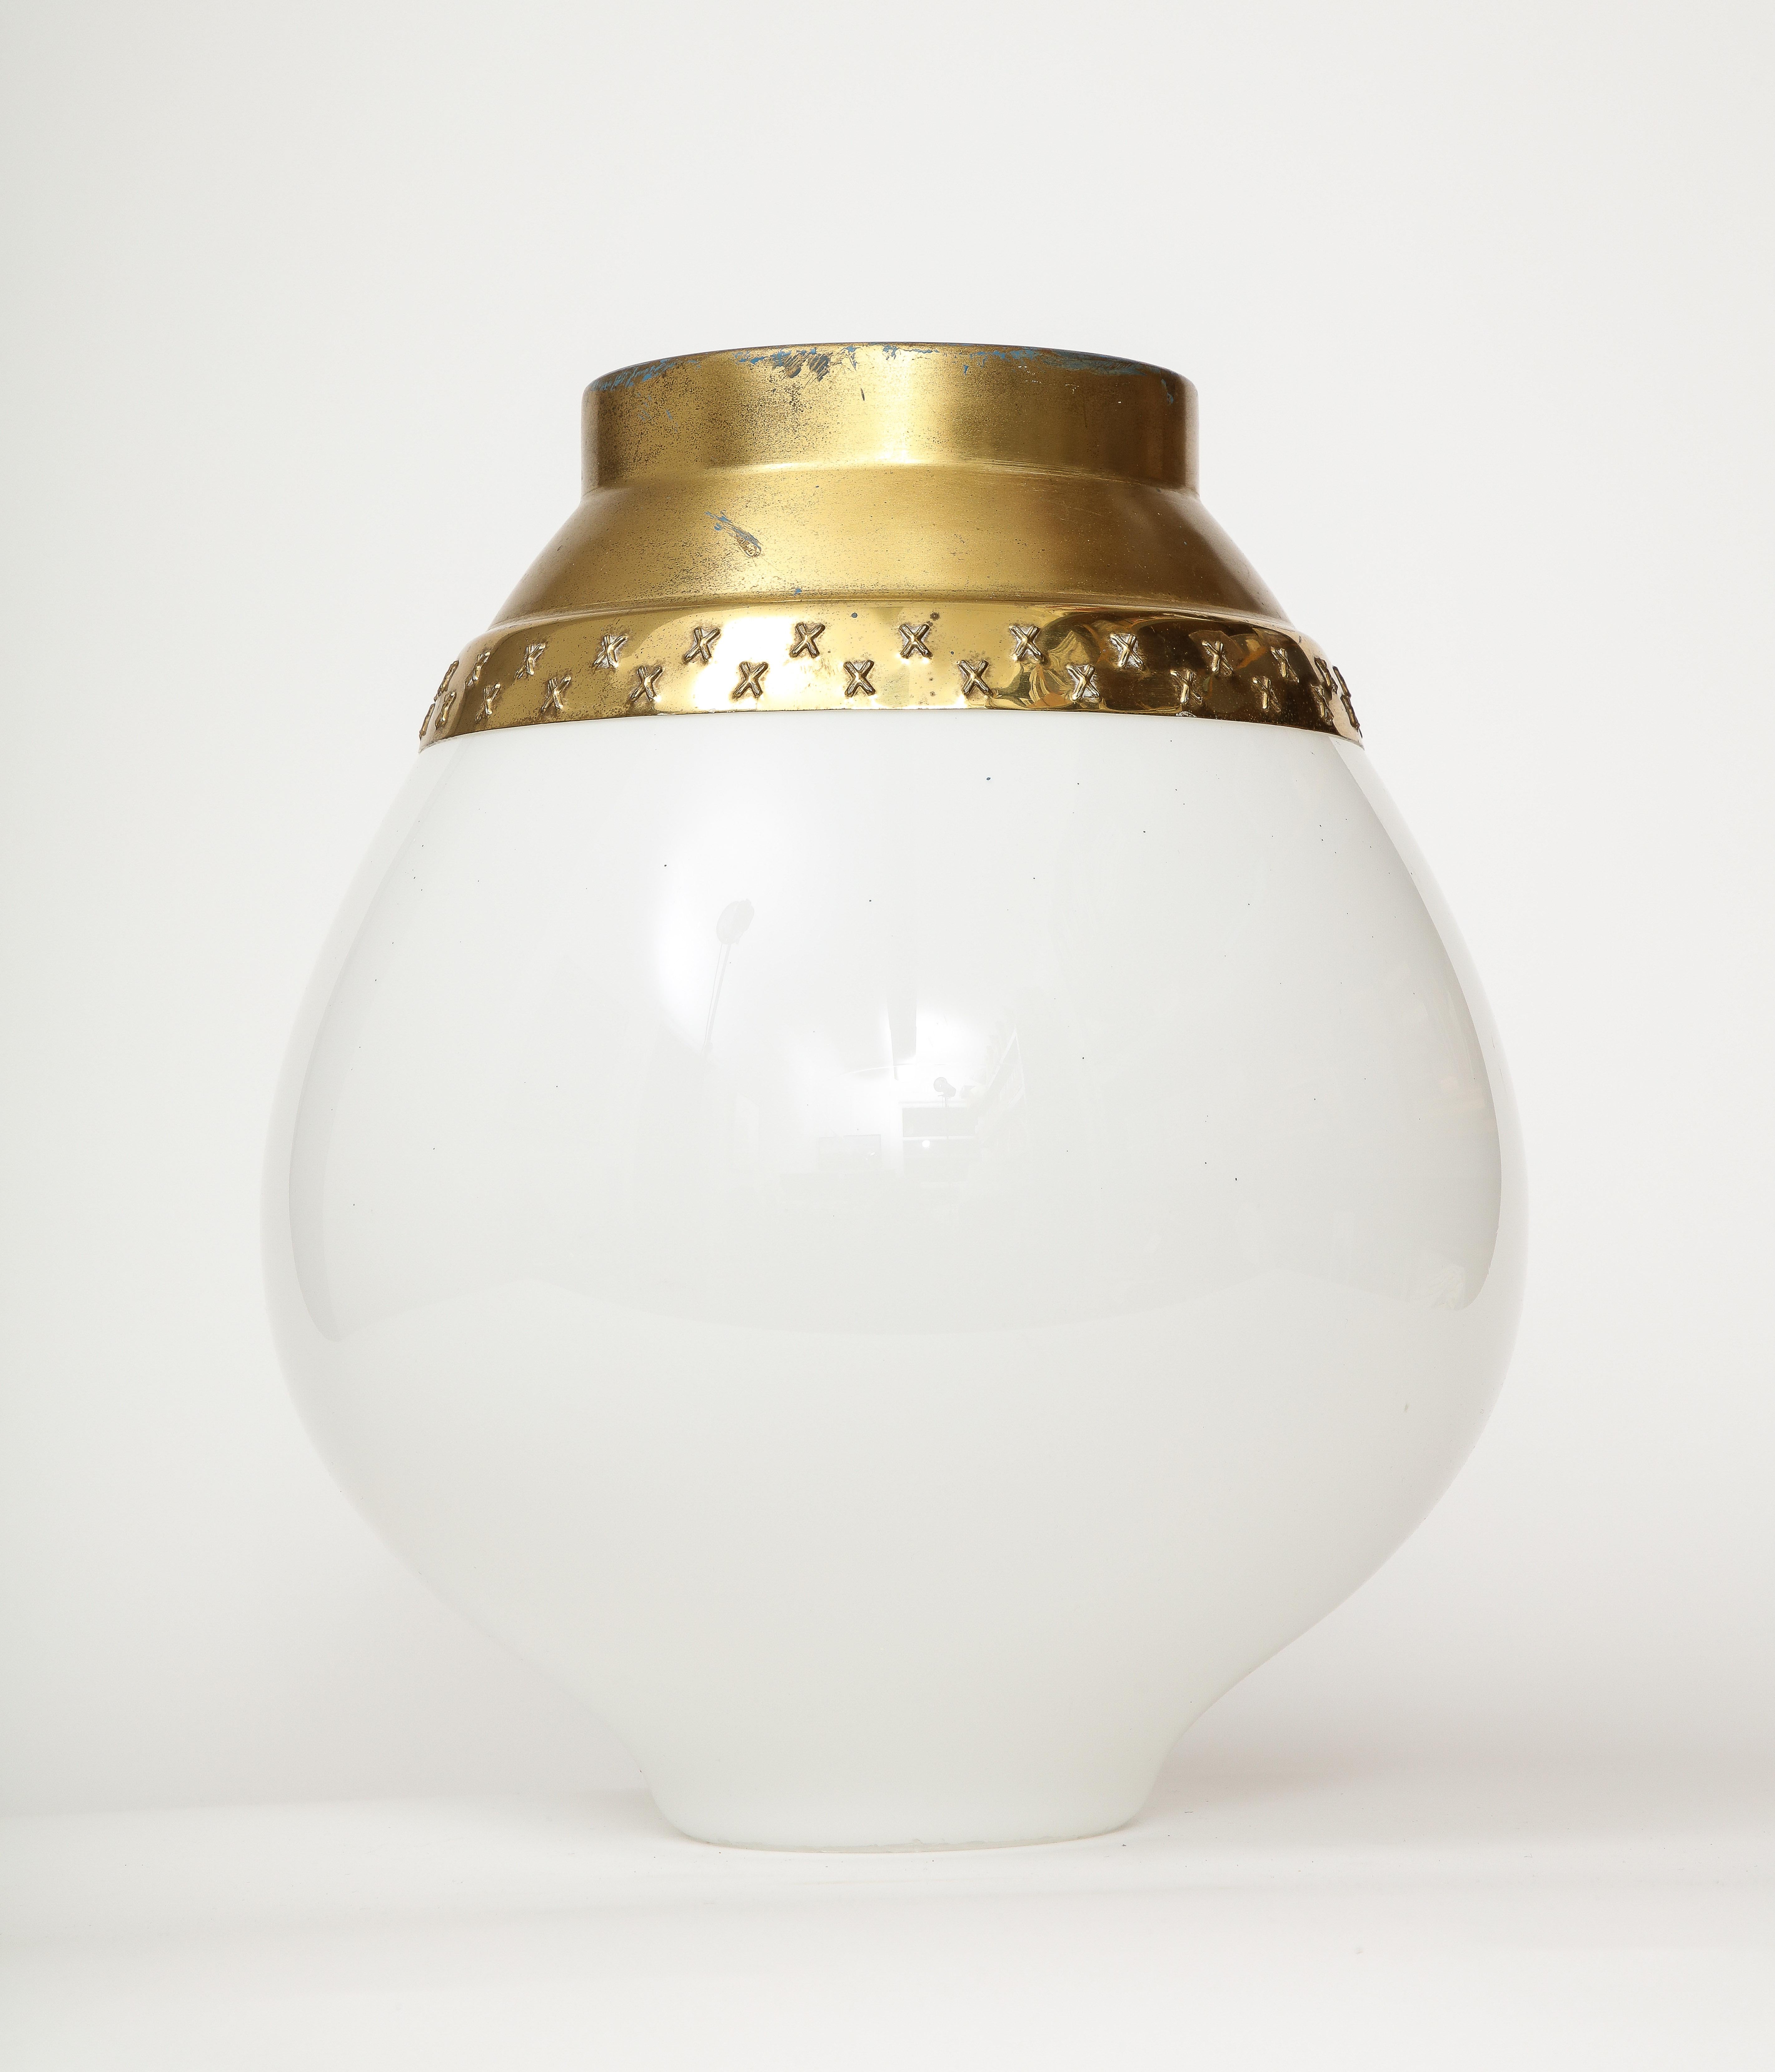 This elegant ceiling light by Lisa Johansson-Pape is gracefully minimal, with sloping art-deco lines and a brass shade that's quintessentially Finnish. This ceiling light is reminiscent of the work of other preeminent Finnish lighting designers such